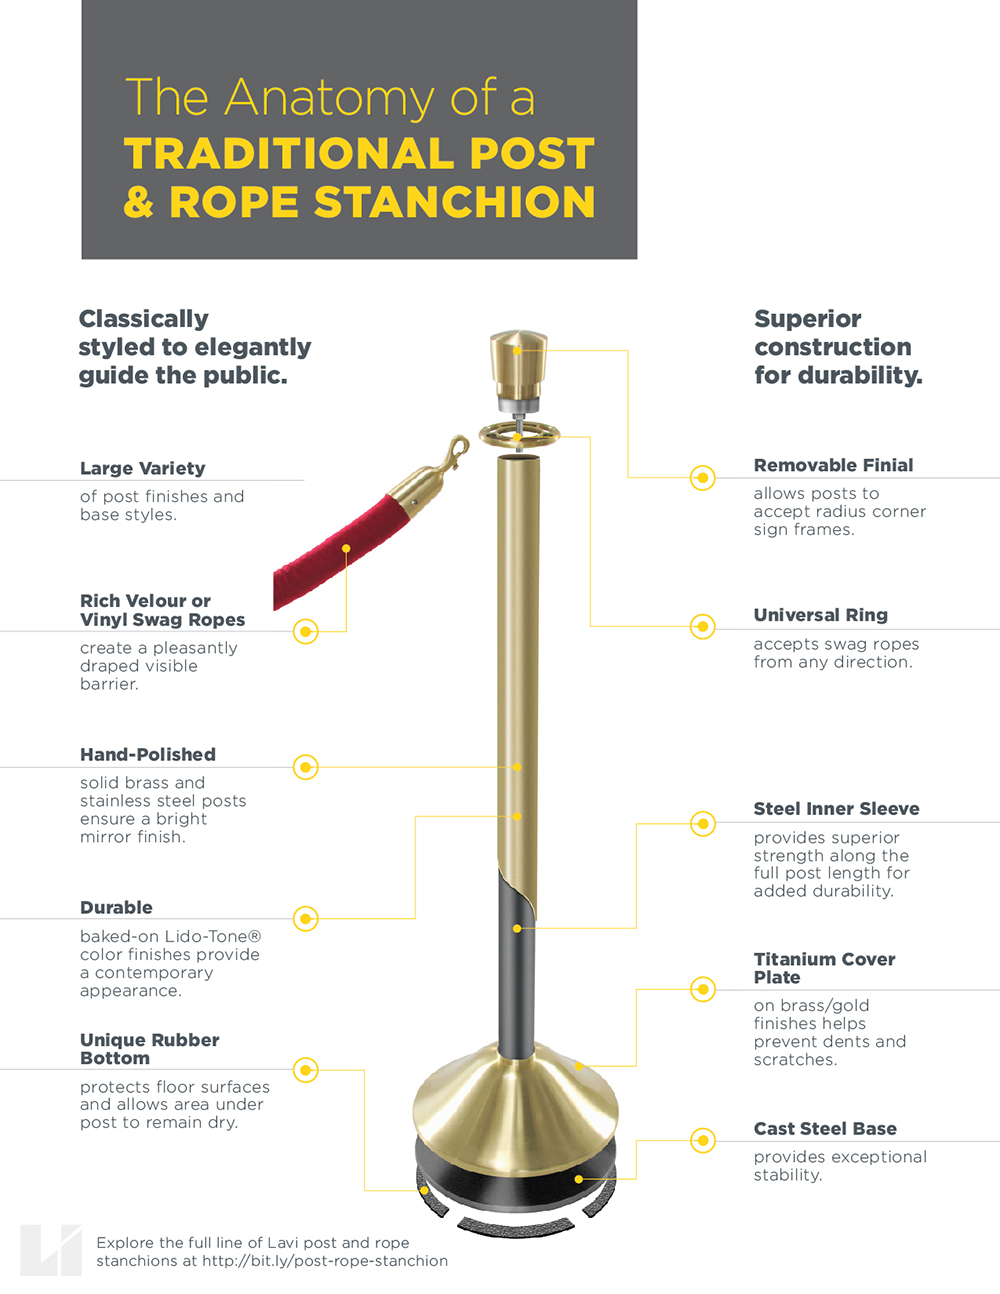 Anatomy of a Traditional Post & Rope Stanchion